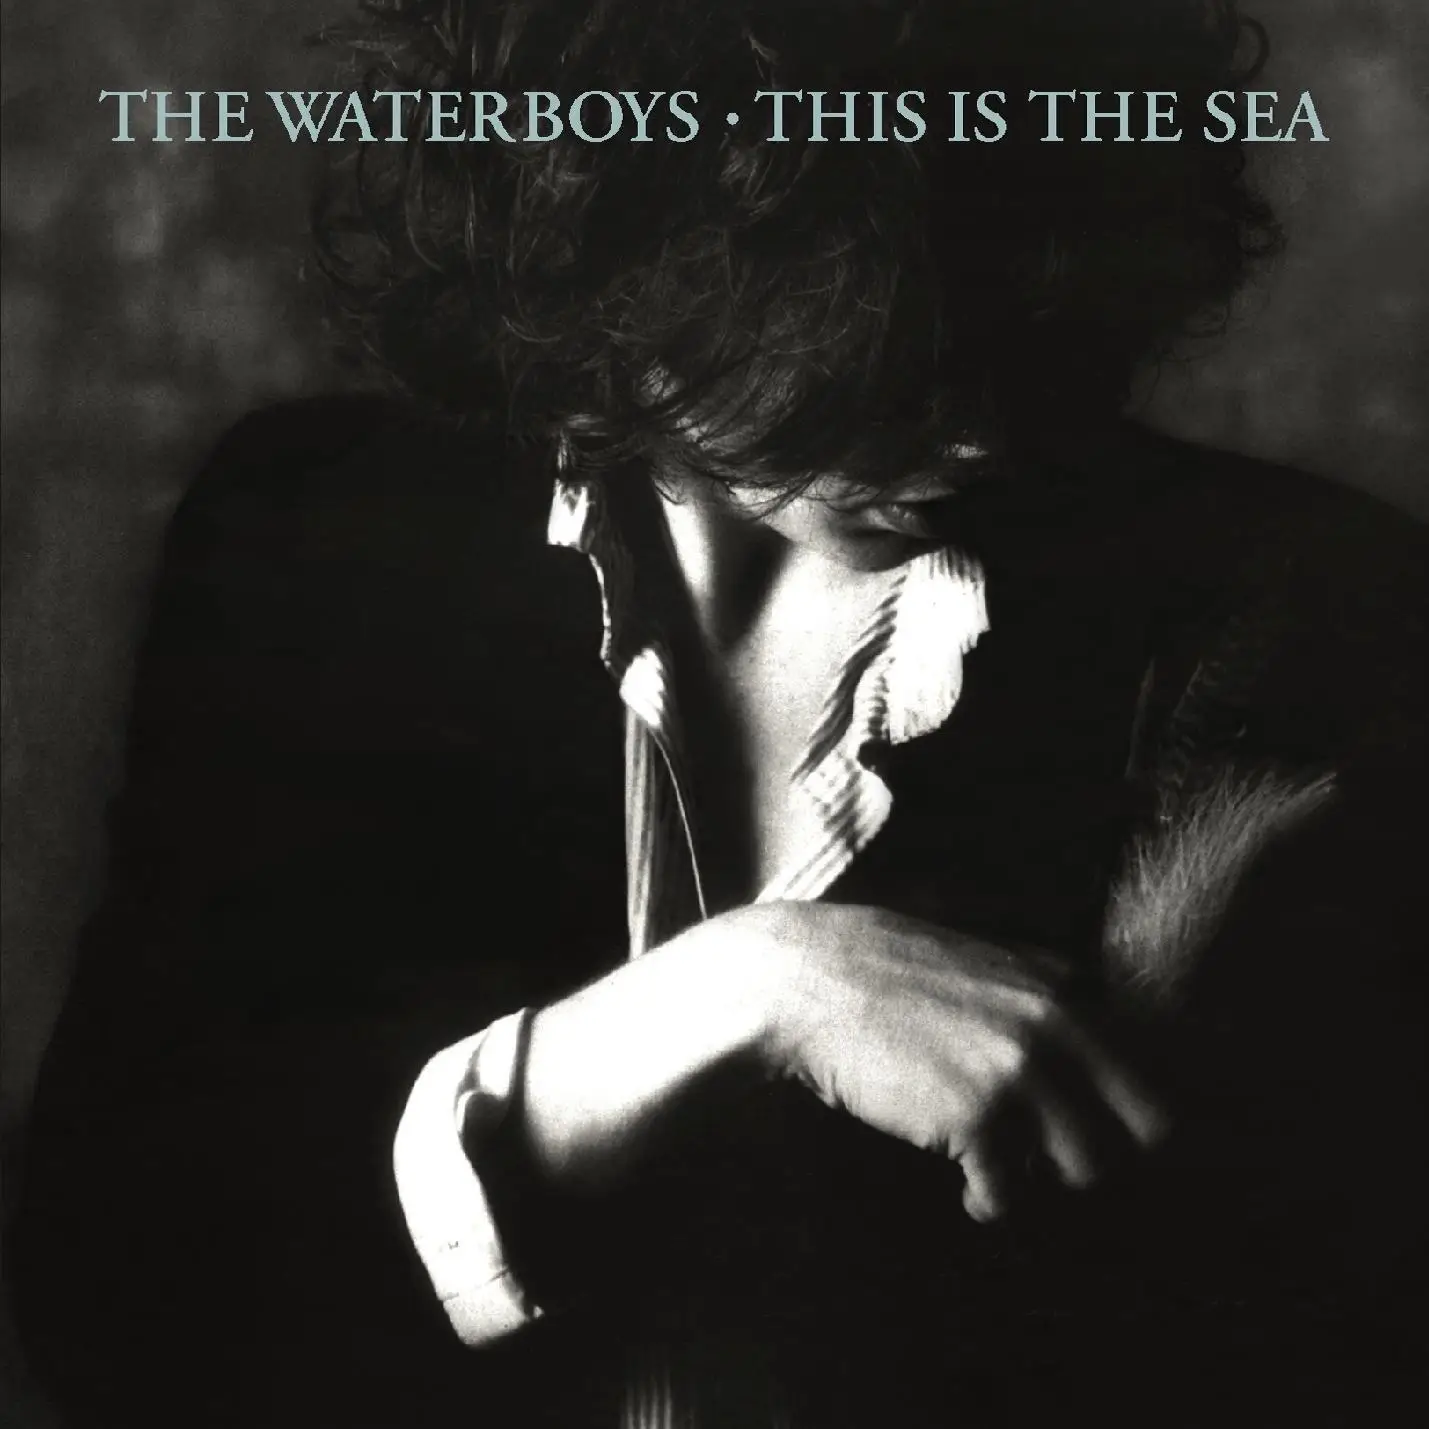 <strong>The Waterboys - This is the Sea</strong> (Vinyl LP - clear)